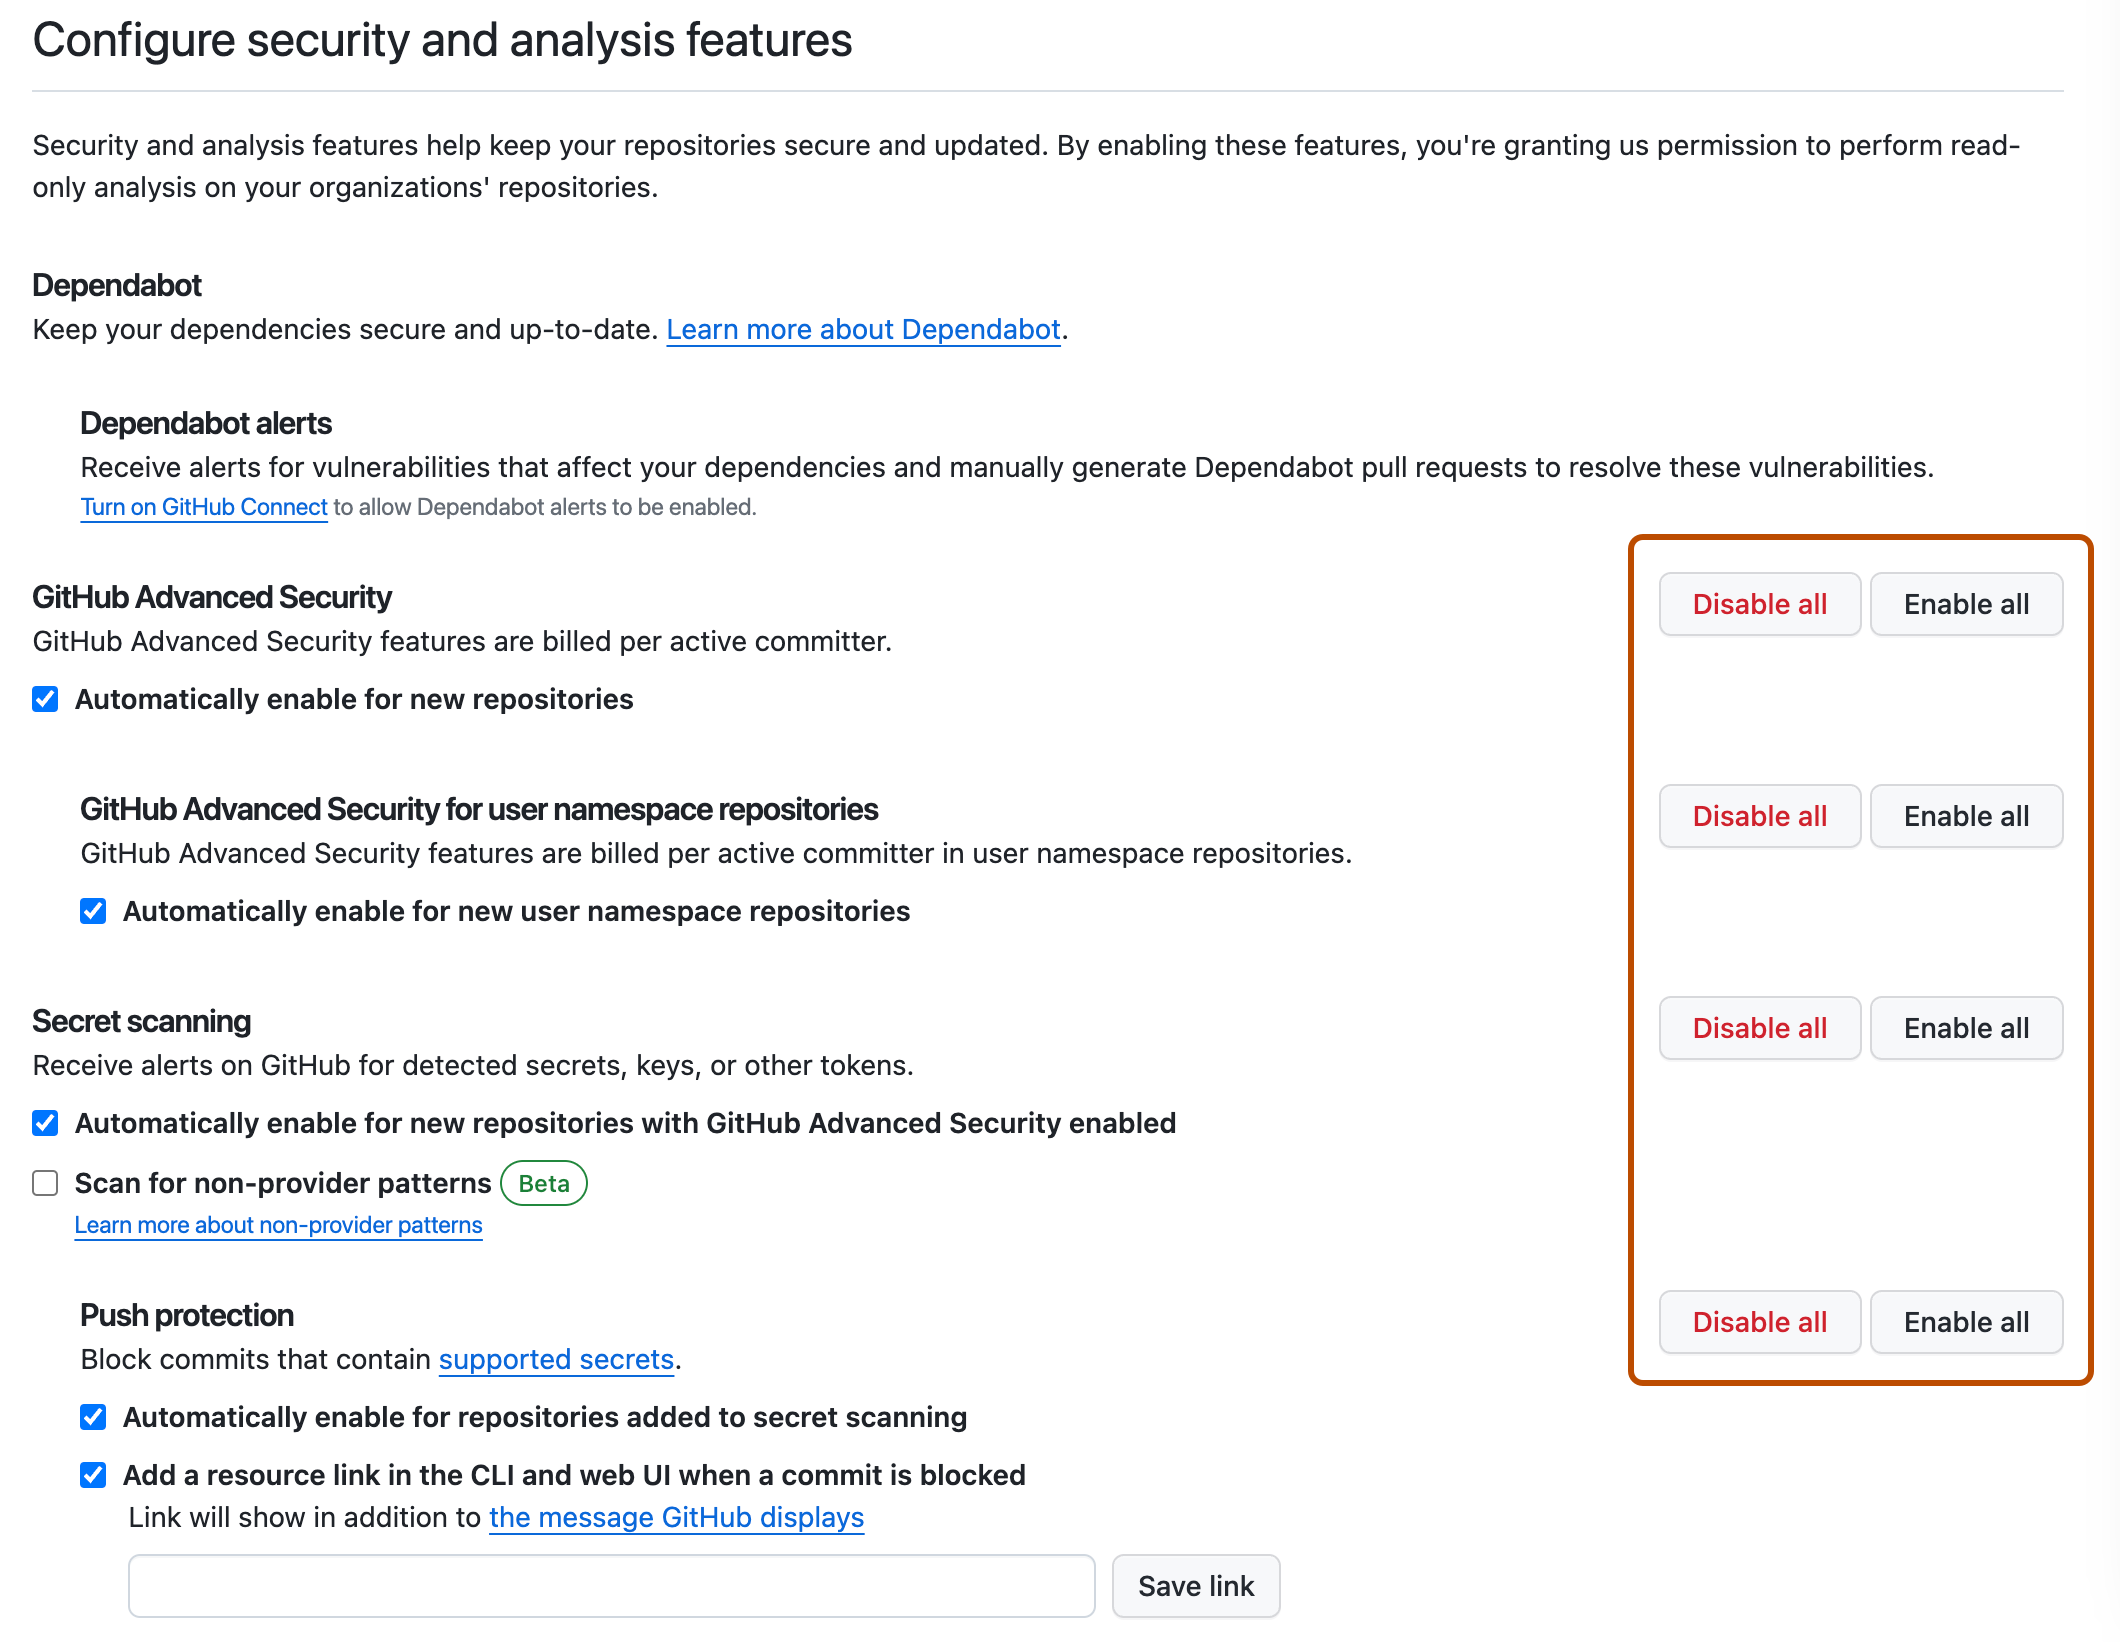 Screenshot of the "Configure security and analysis features" section of the enterprise settings. To the right of each setting are "Enable all" and "Disable all" buttons, which are outlined in dark orange.